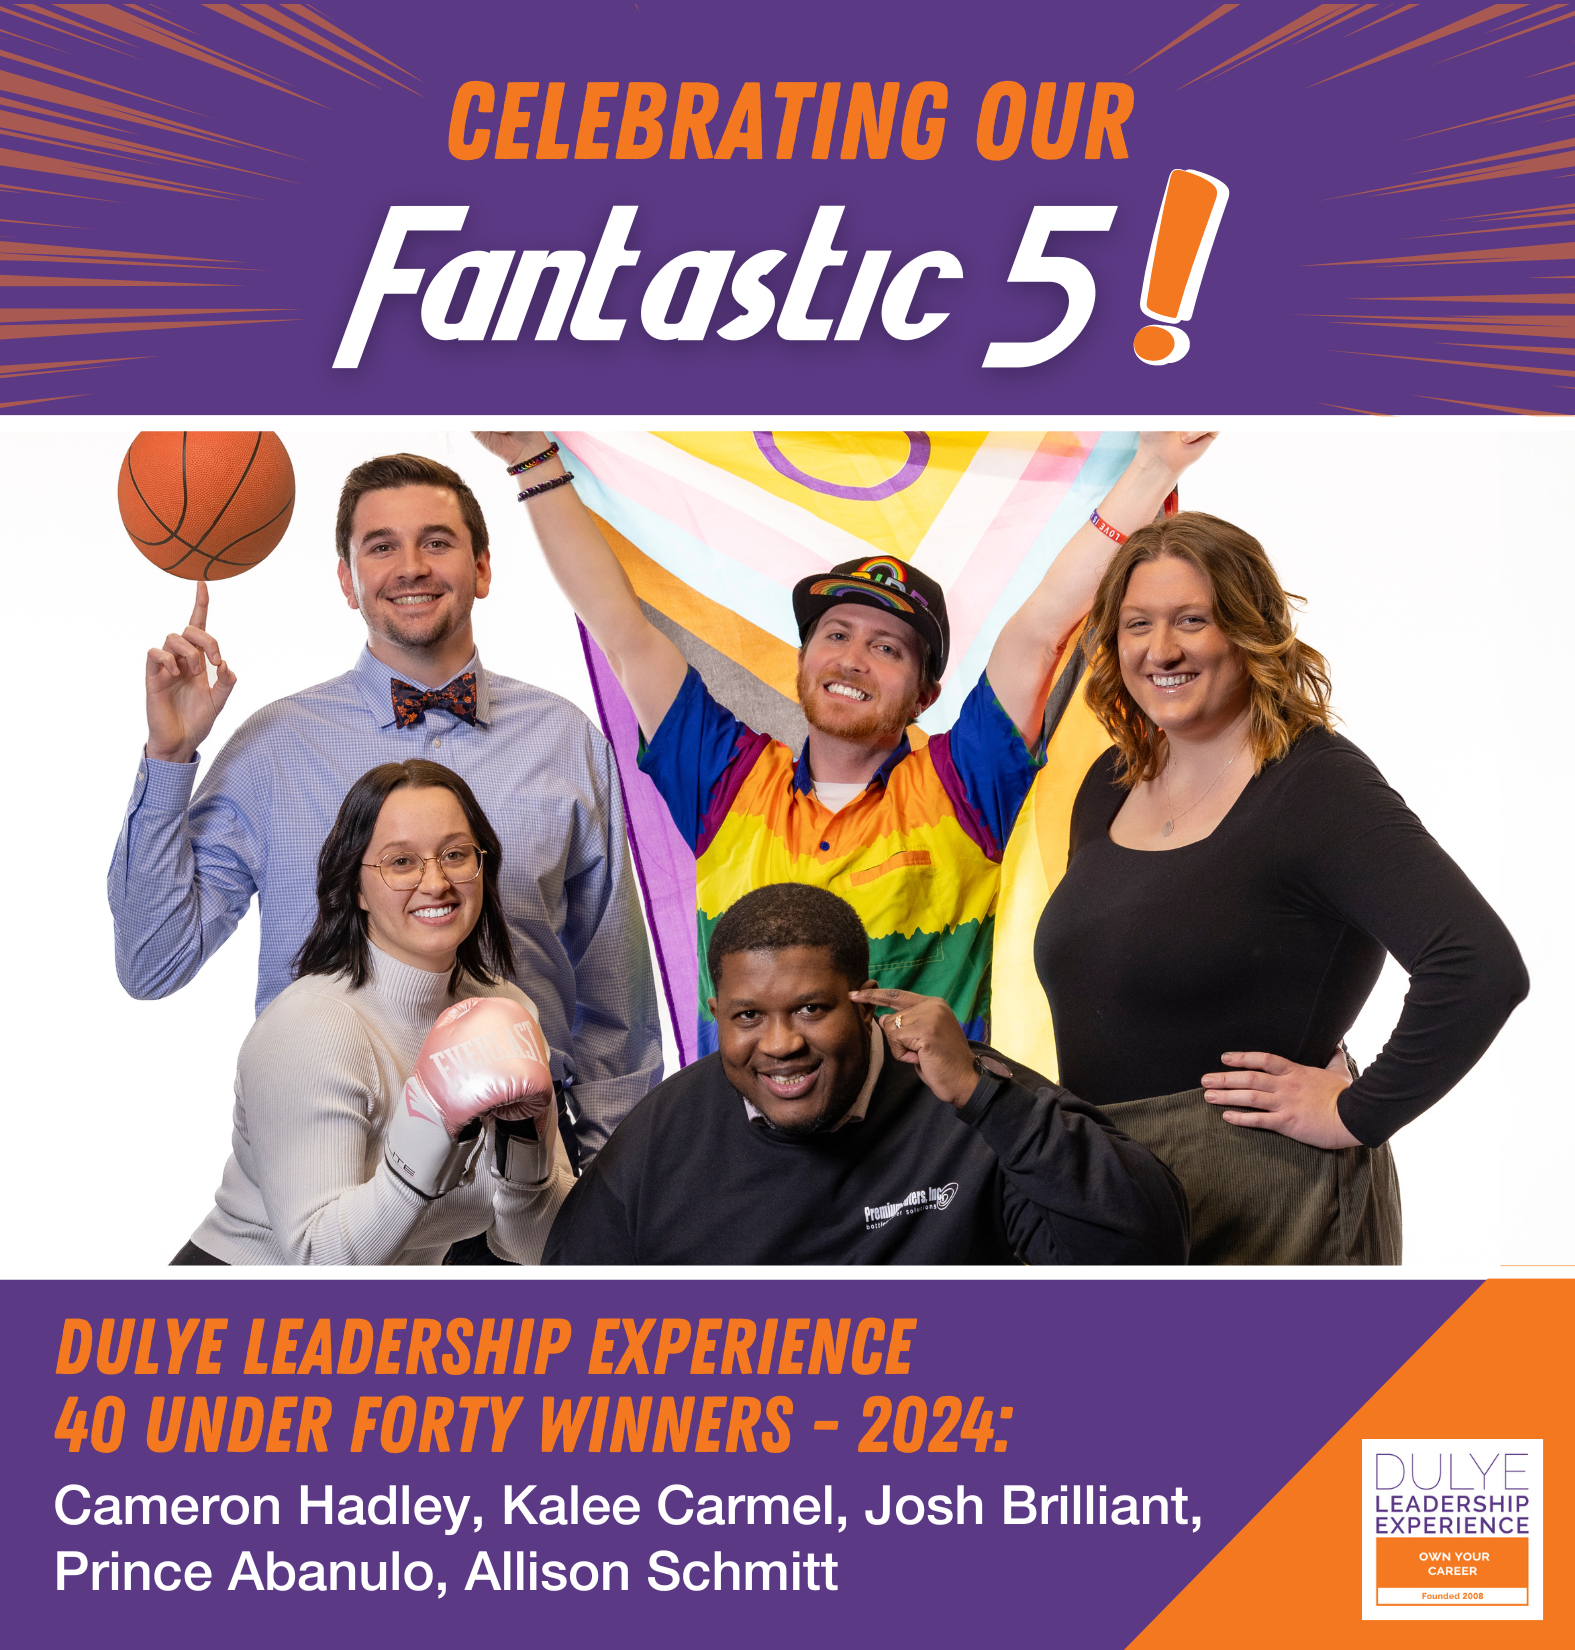 40 UNDER FORTY WINNERS: ANNOUNCING THE DLE FANTASTIC 5